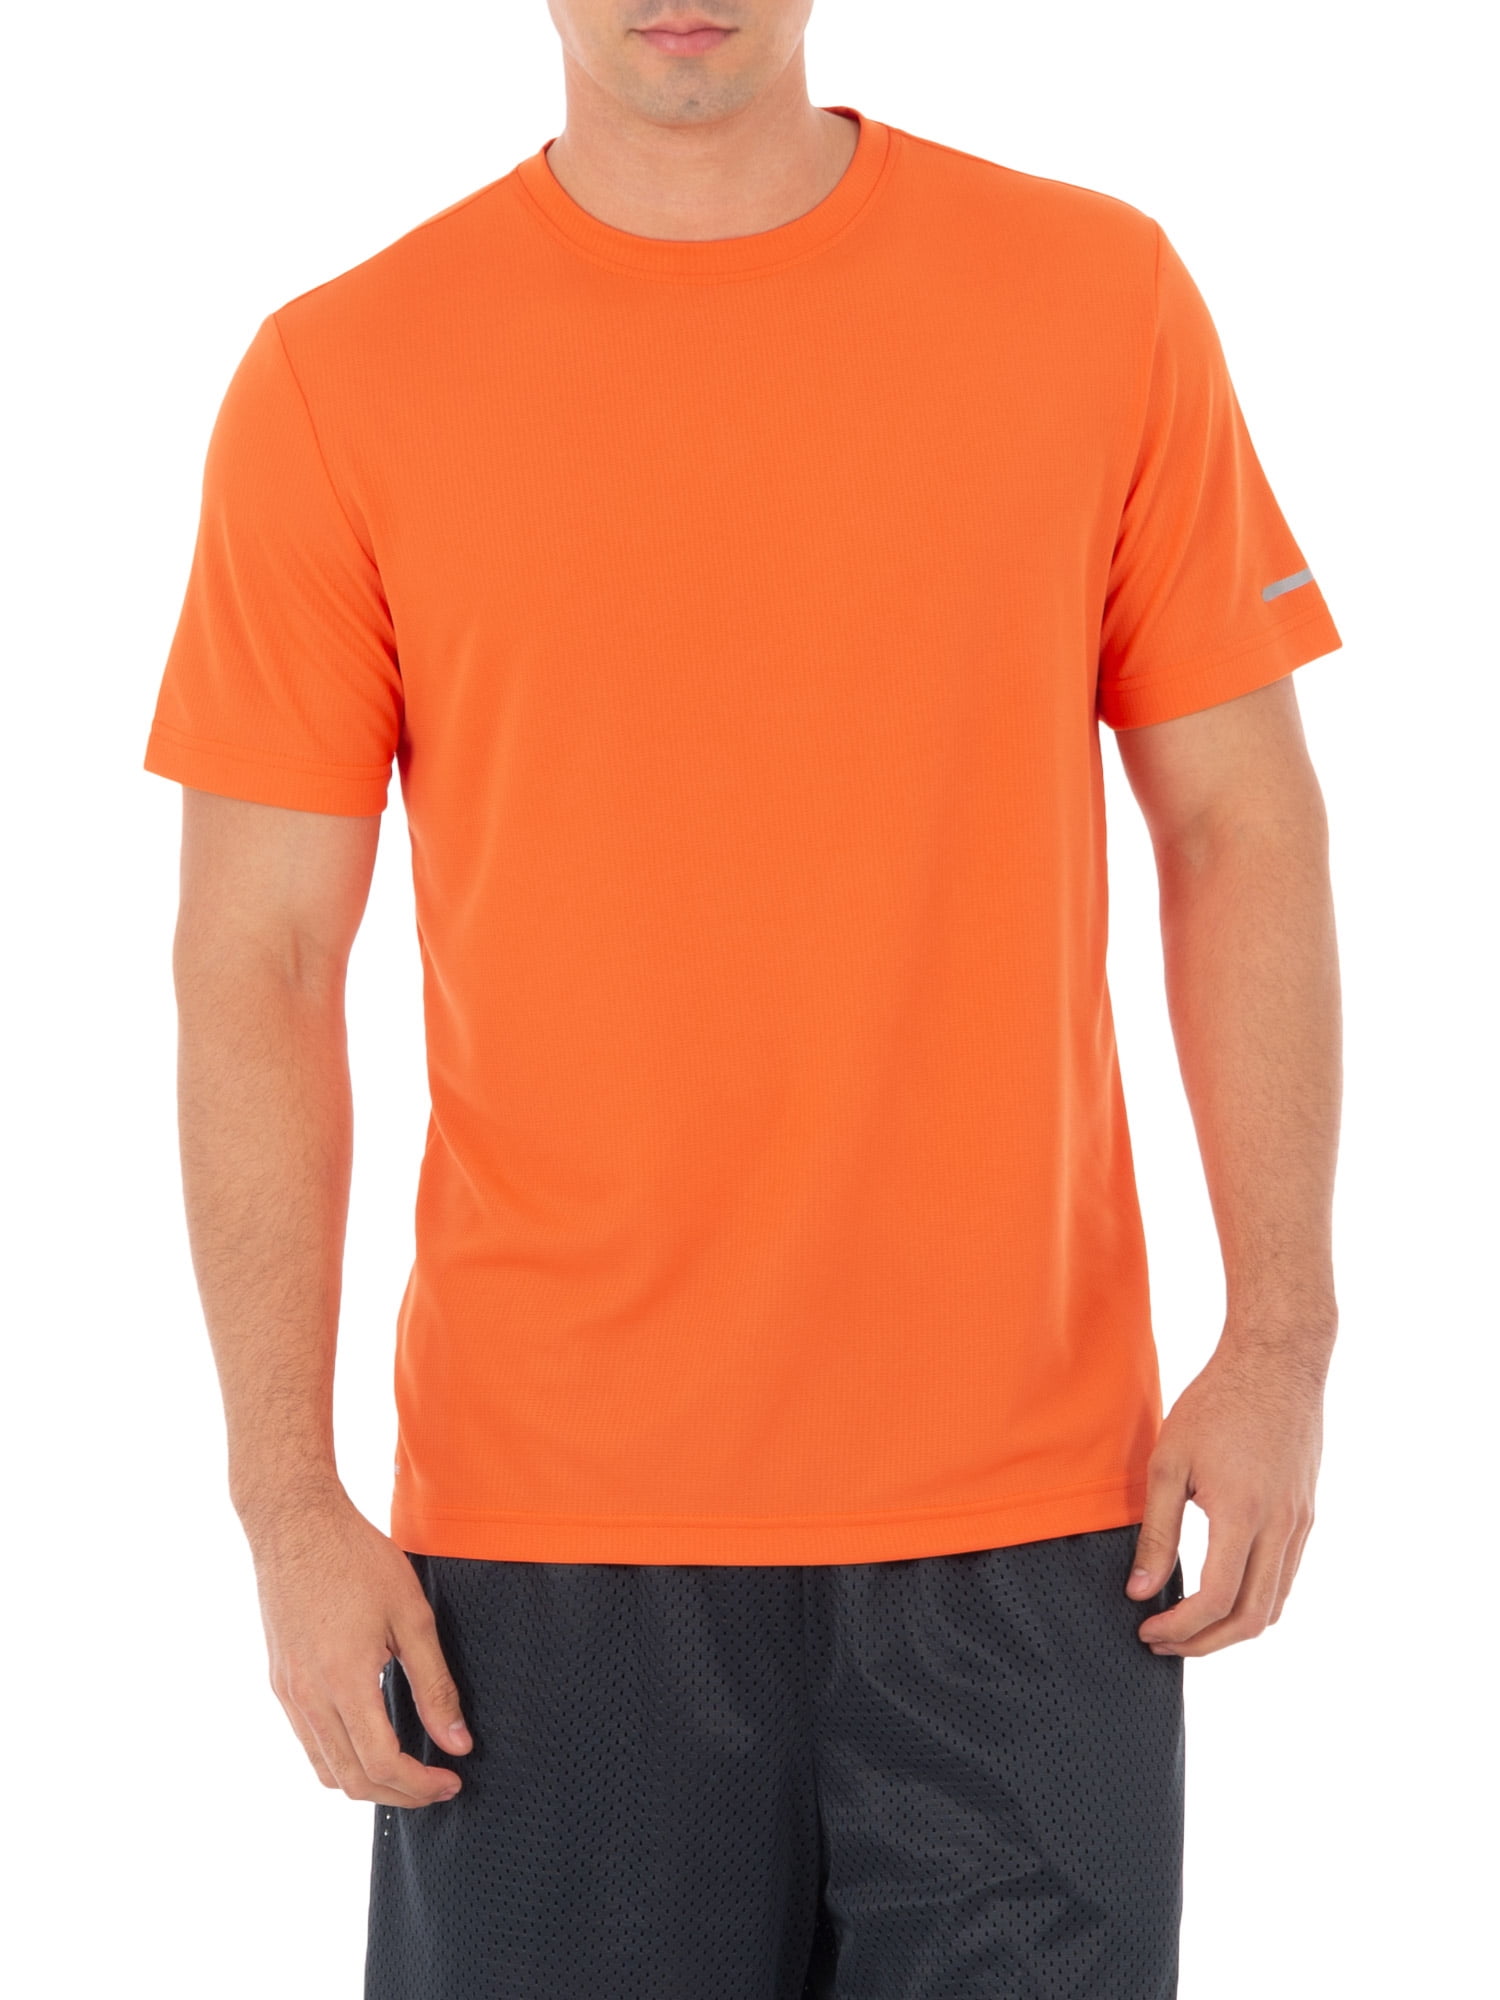 athletic works quick dry tee